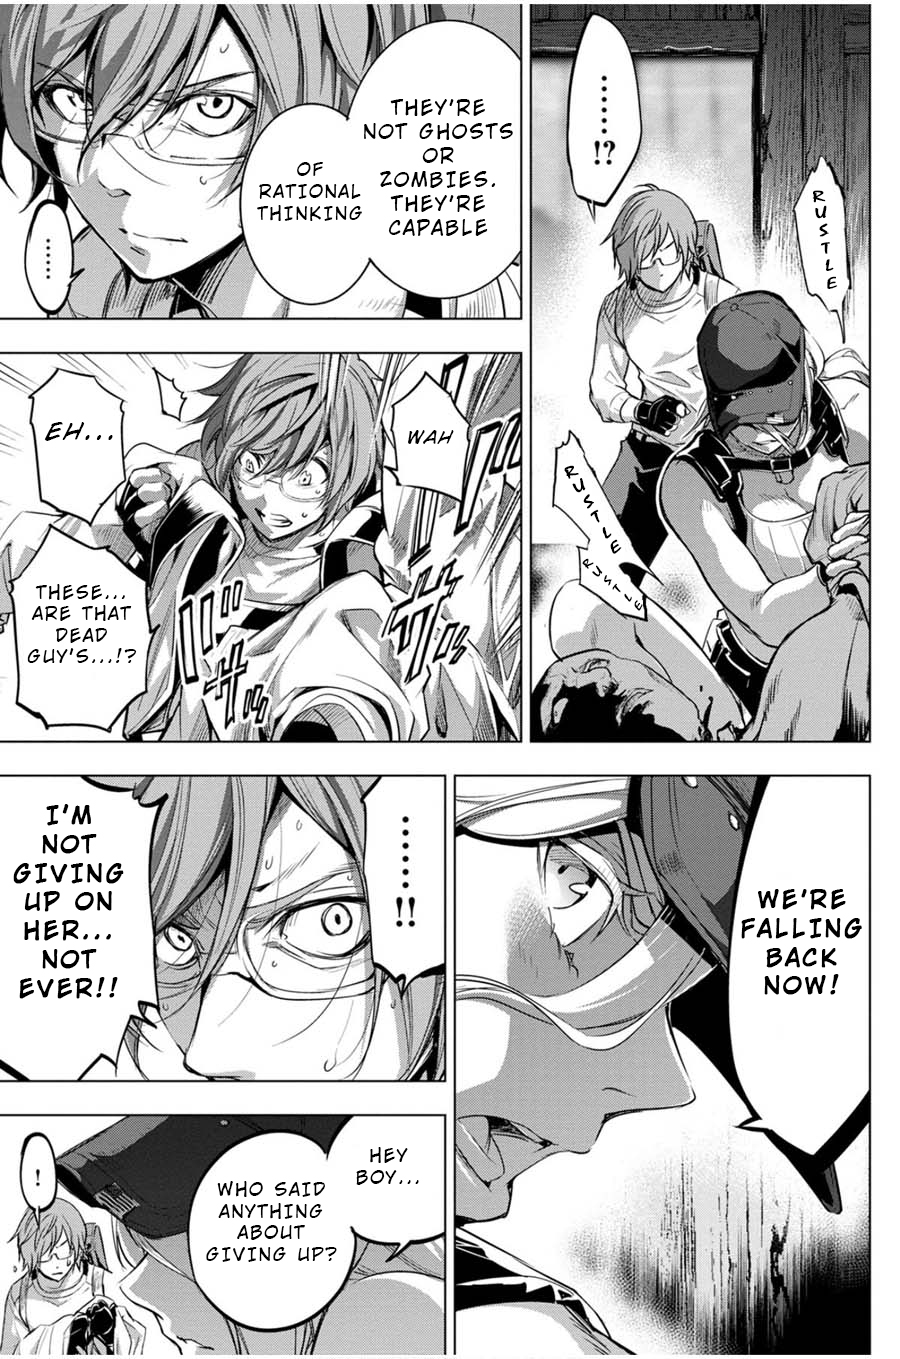 Ingoshima Vol. 3 Ch. 23 Where There's a Will There's a Way